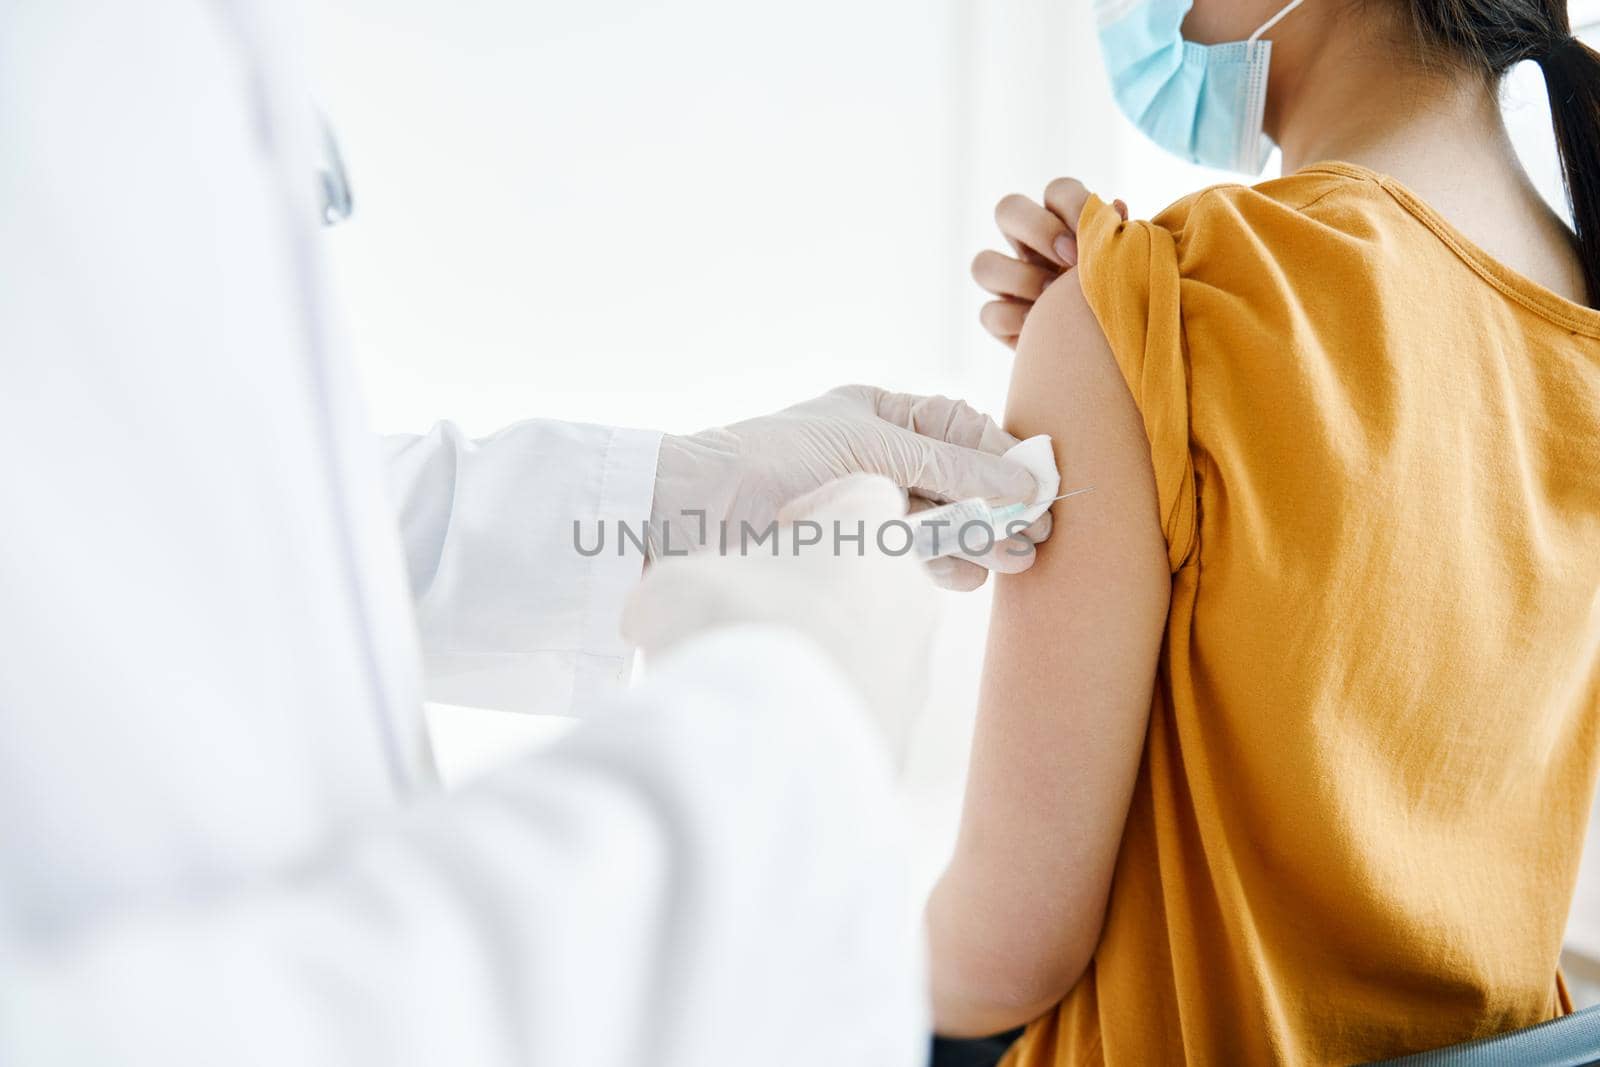 doctor giving an injection to the patient's shoulder close-up cropped view covid vaccination by SHOTPRIME